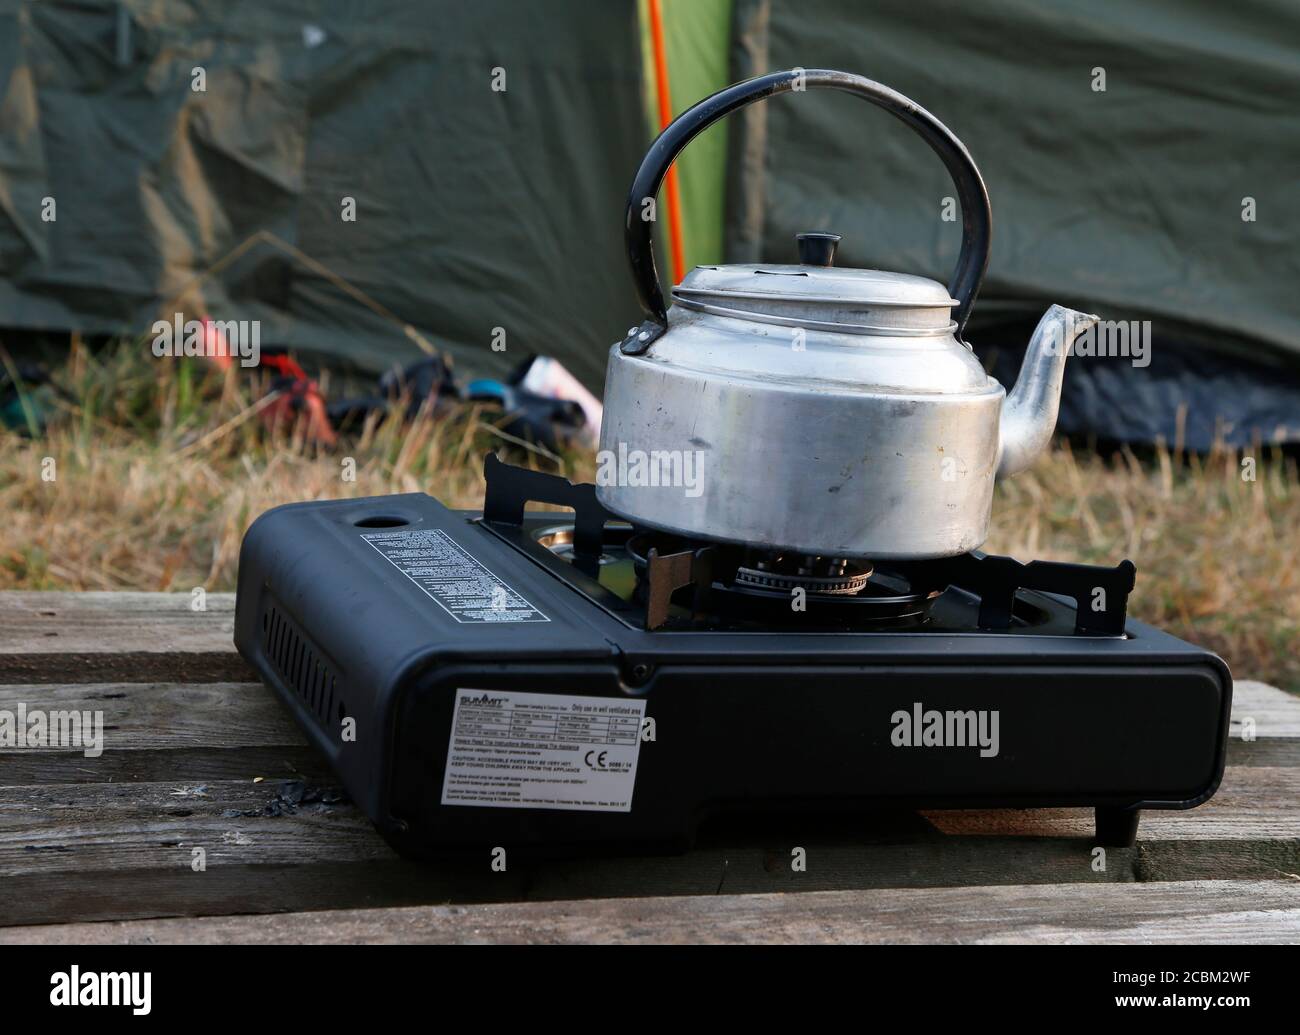 A kettle boiling on a portable stove Stock Photo